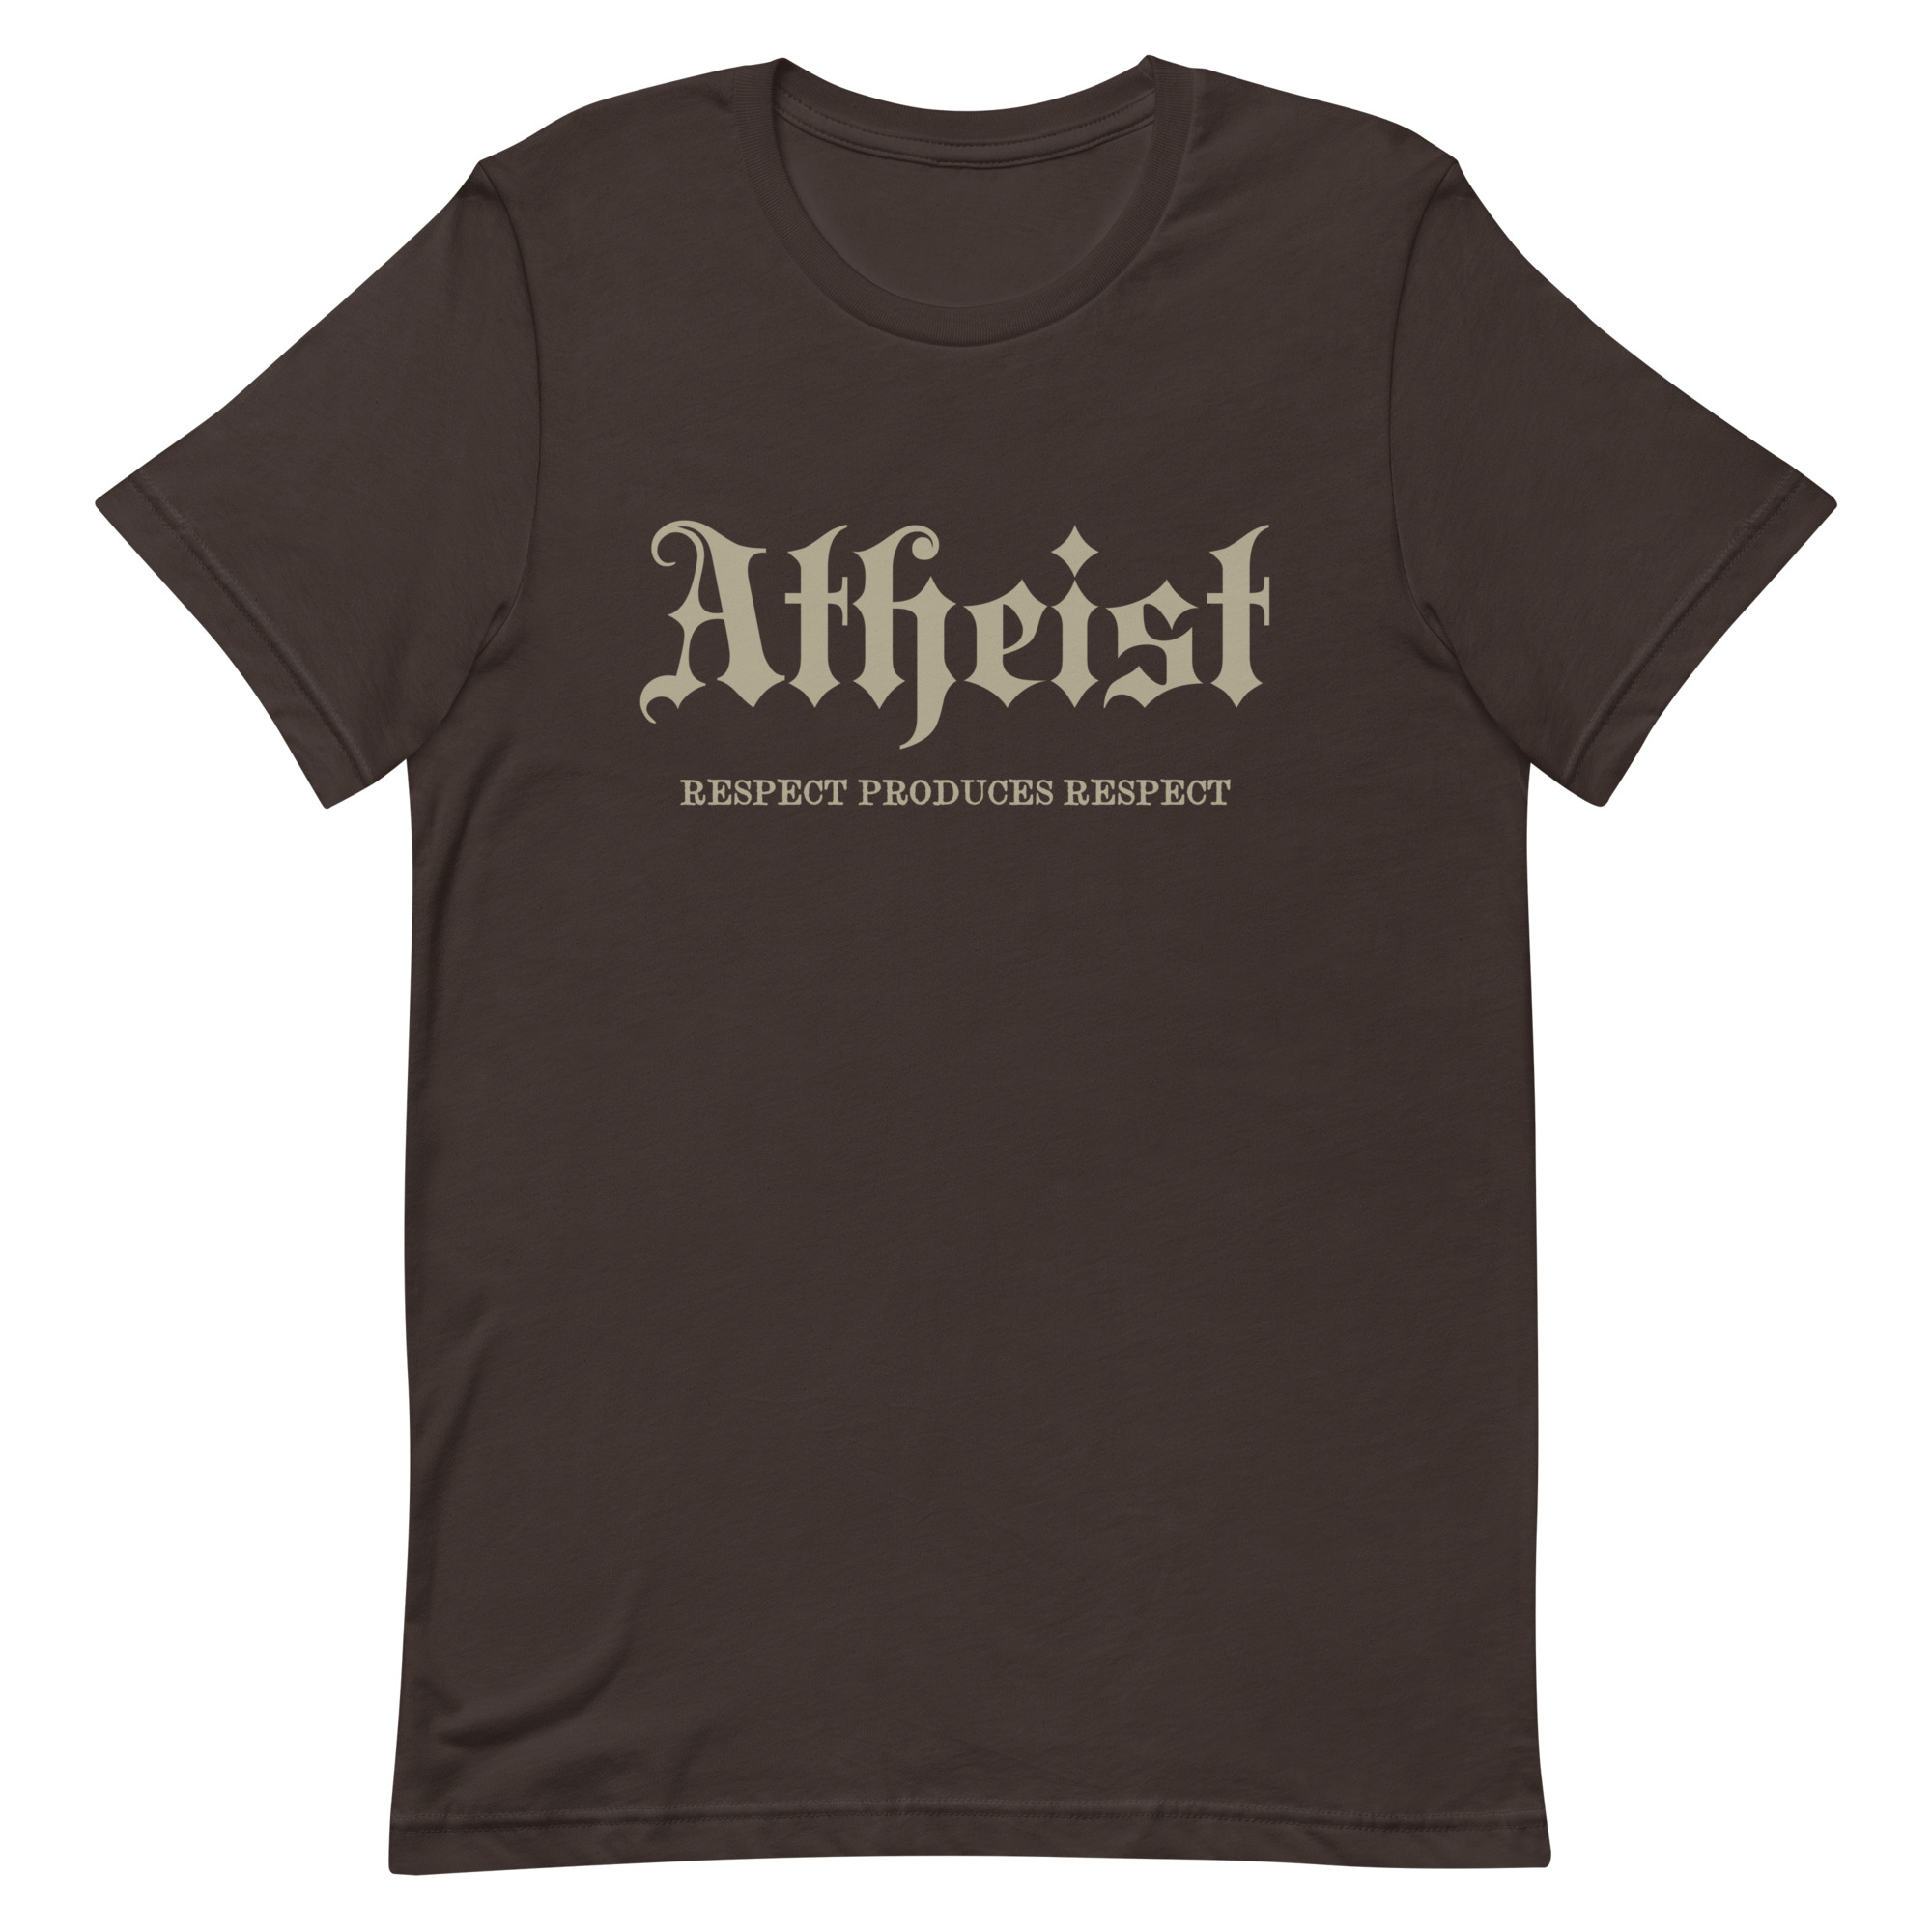 Featured image for “Atheist - Unisex t-shirt”